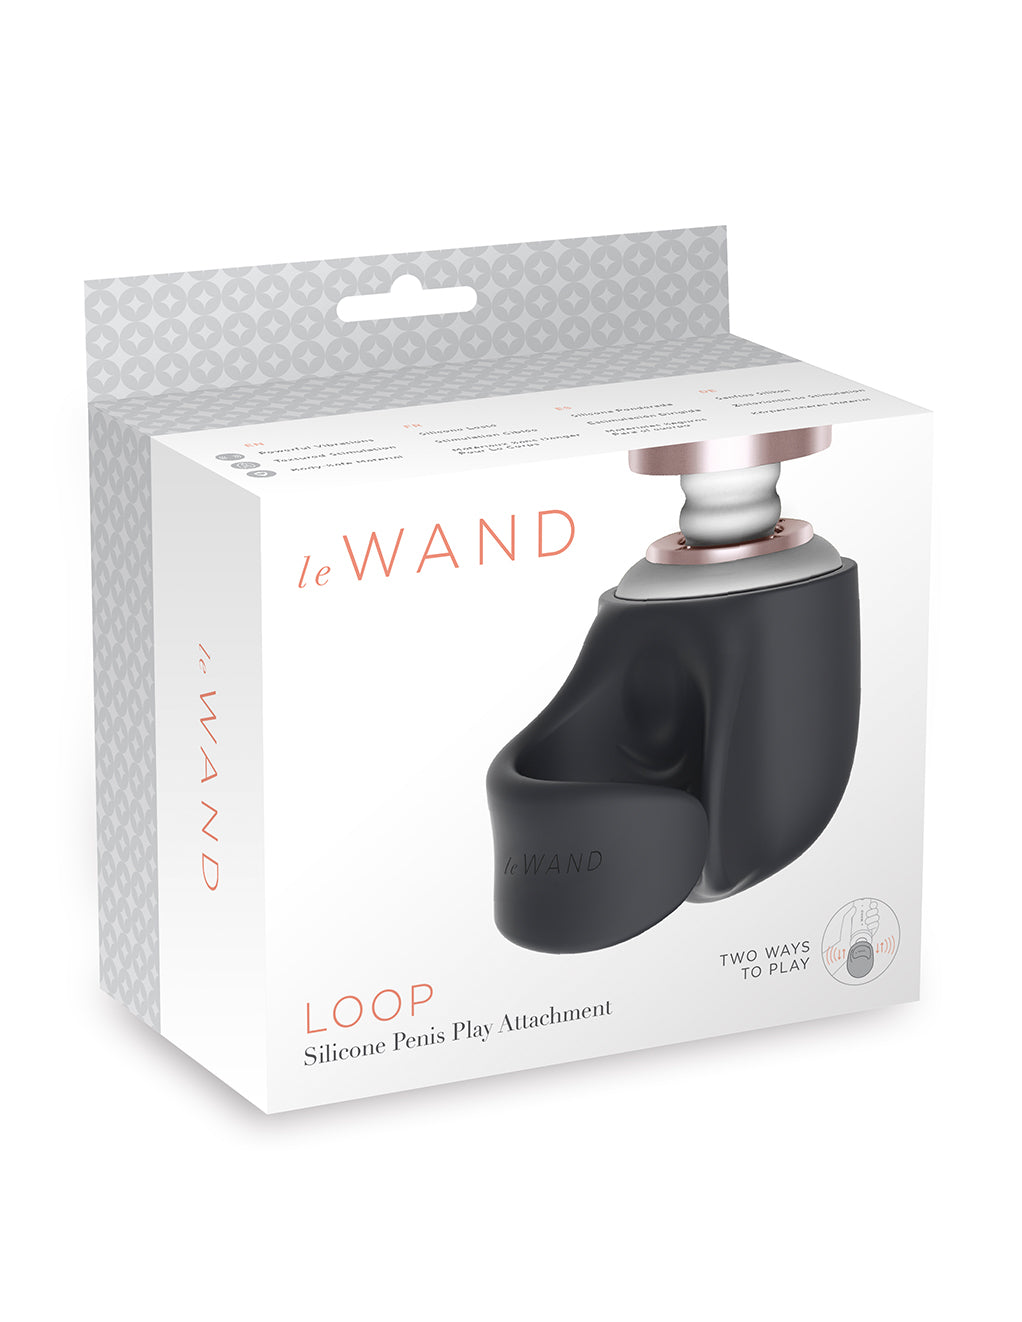 Le Wand Penis Loop Attachment- Package